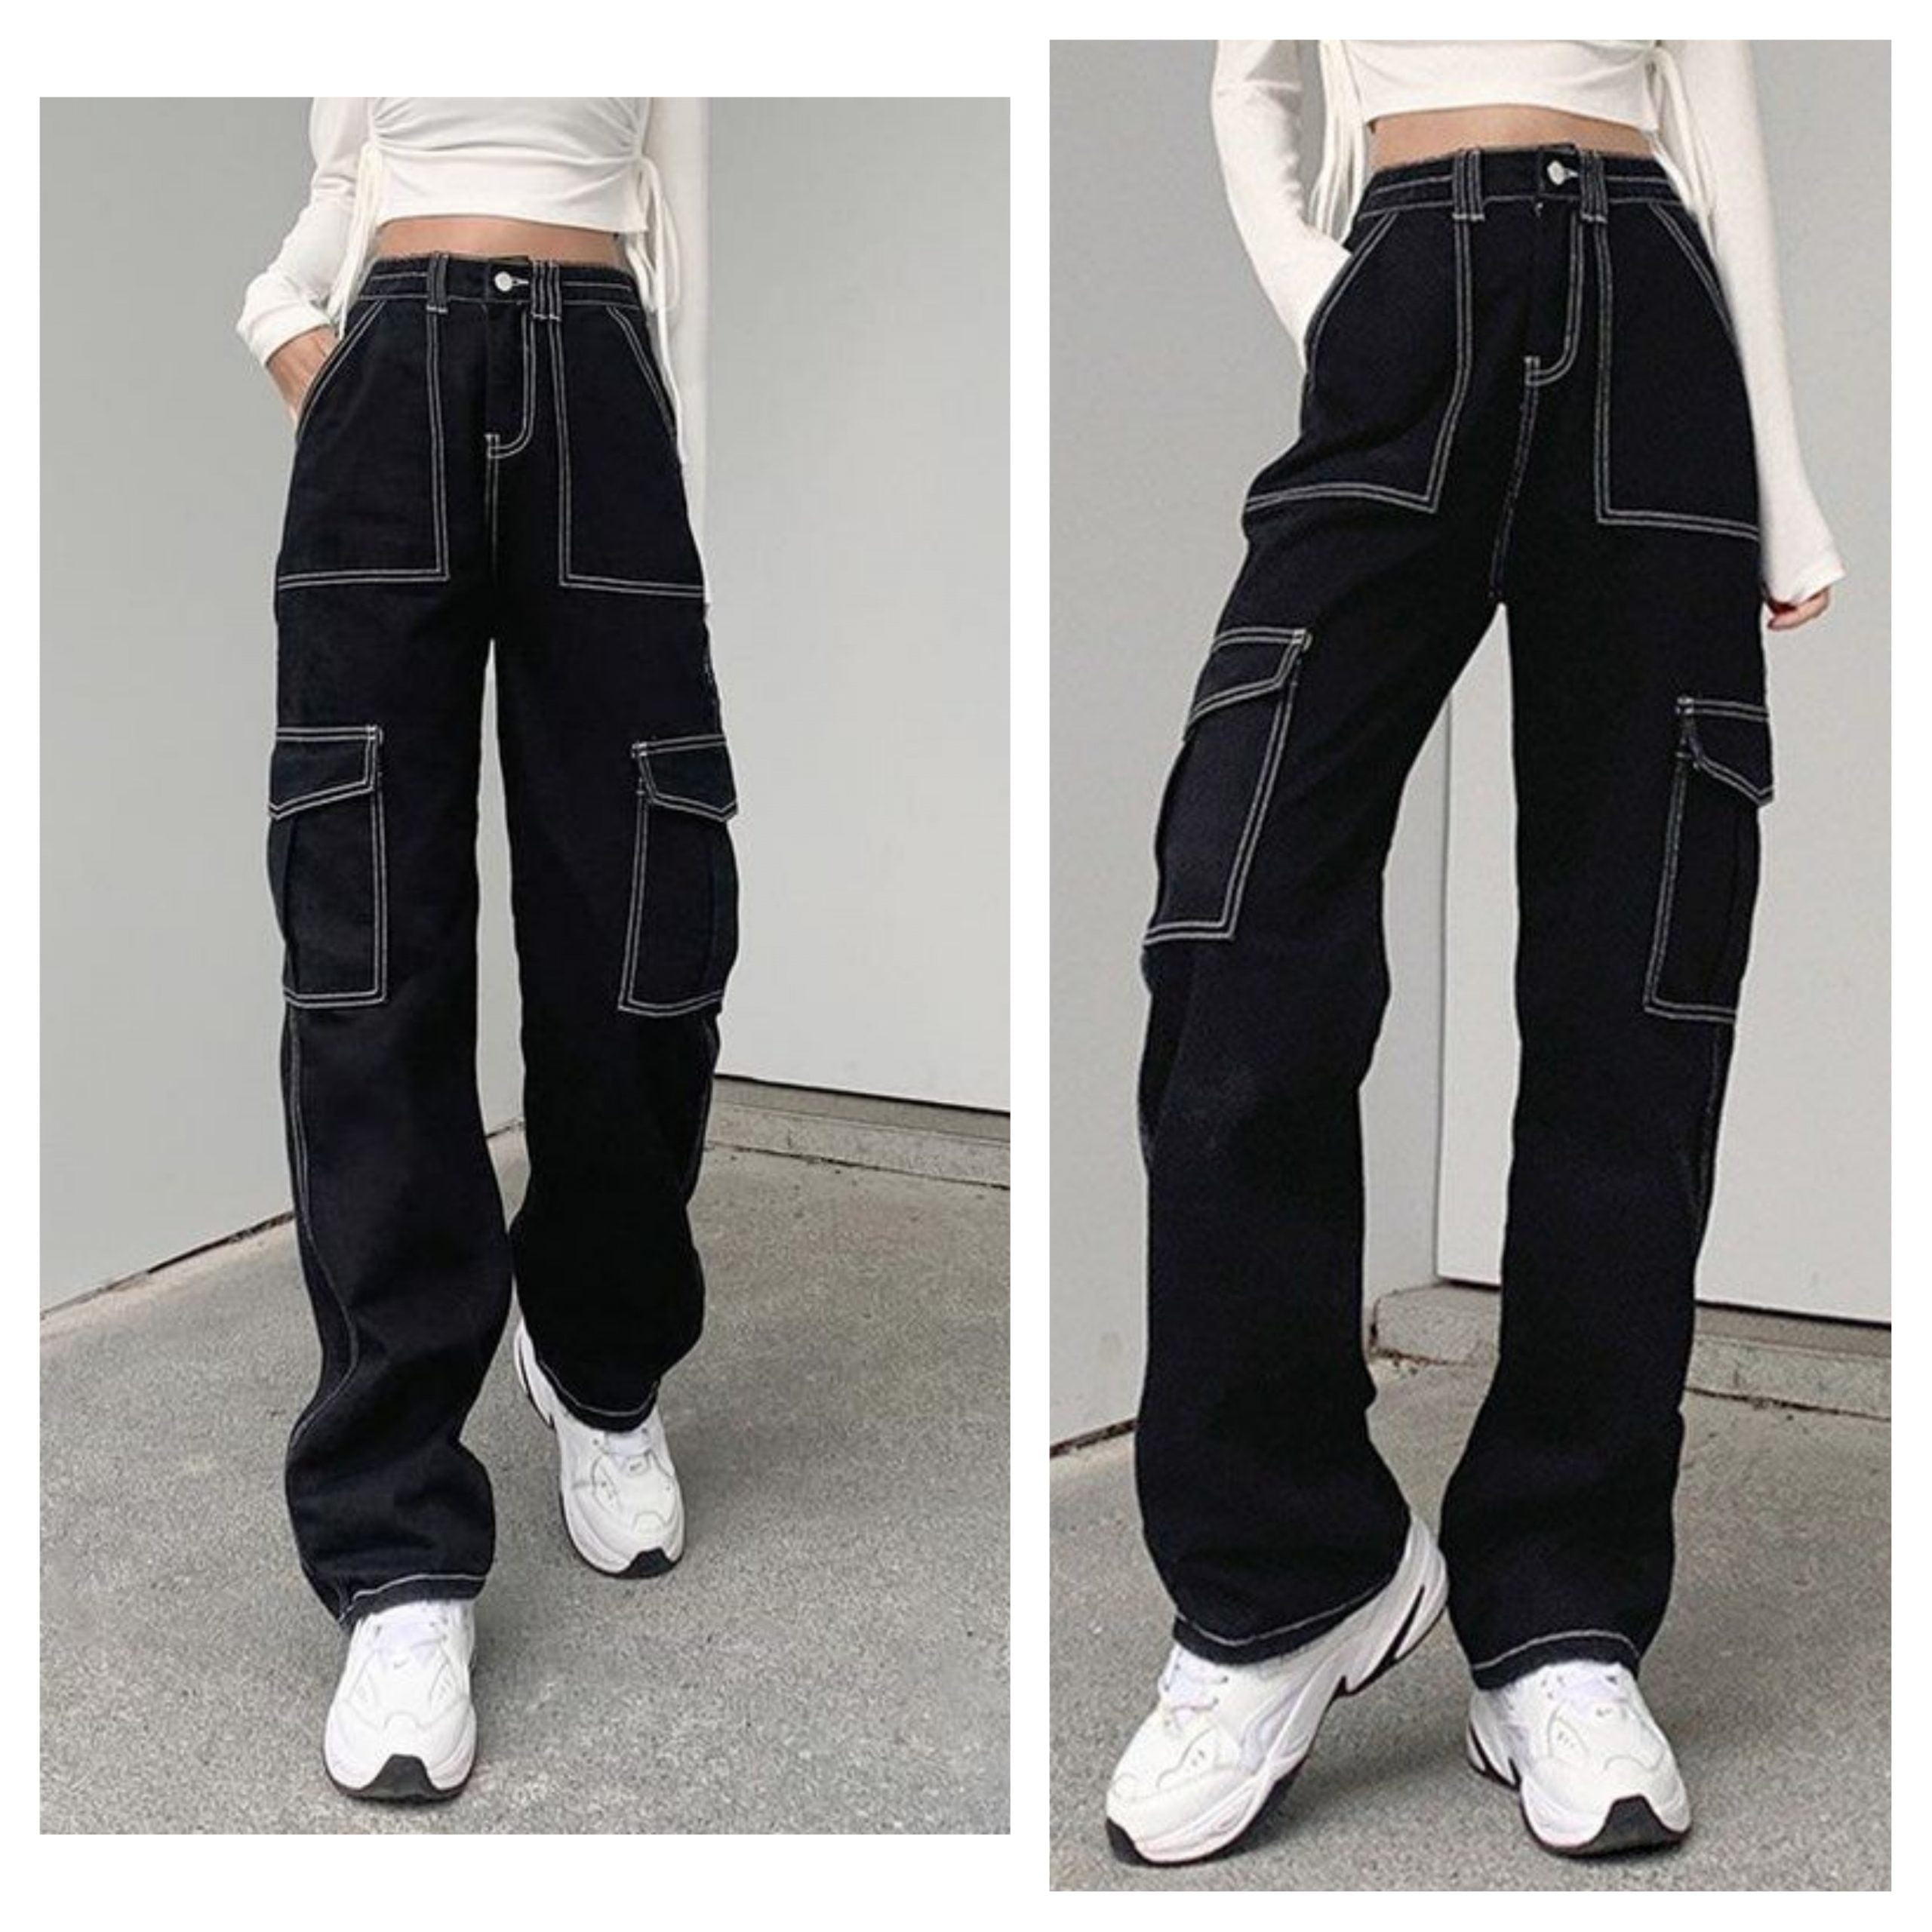 SHE N' HE.SHOP-HIGH QUALITY SIX POCKET CARGO STRAIGHT PANTS FOR MEN  AFFRODABLE PRICE AND COMFORTABLE TO WEAR BREATHBLE PANTS THREE COLORS ONLY  MENS CARGO PANTS ELEGANT PANTS IT FITS TO YOUR DAILY